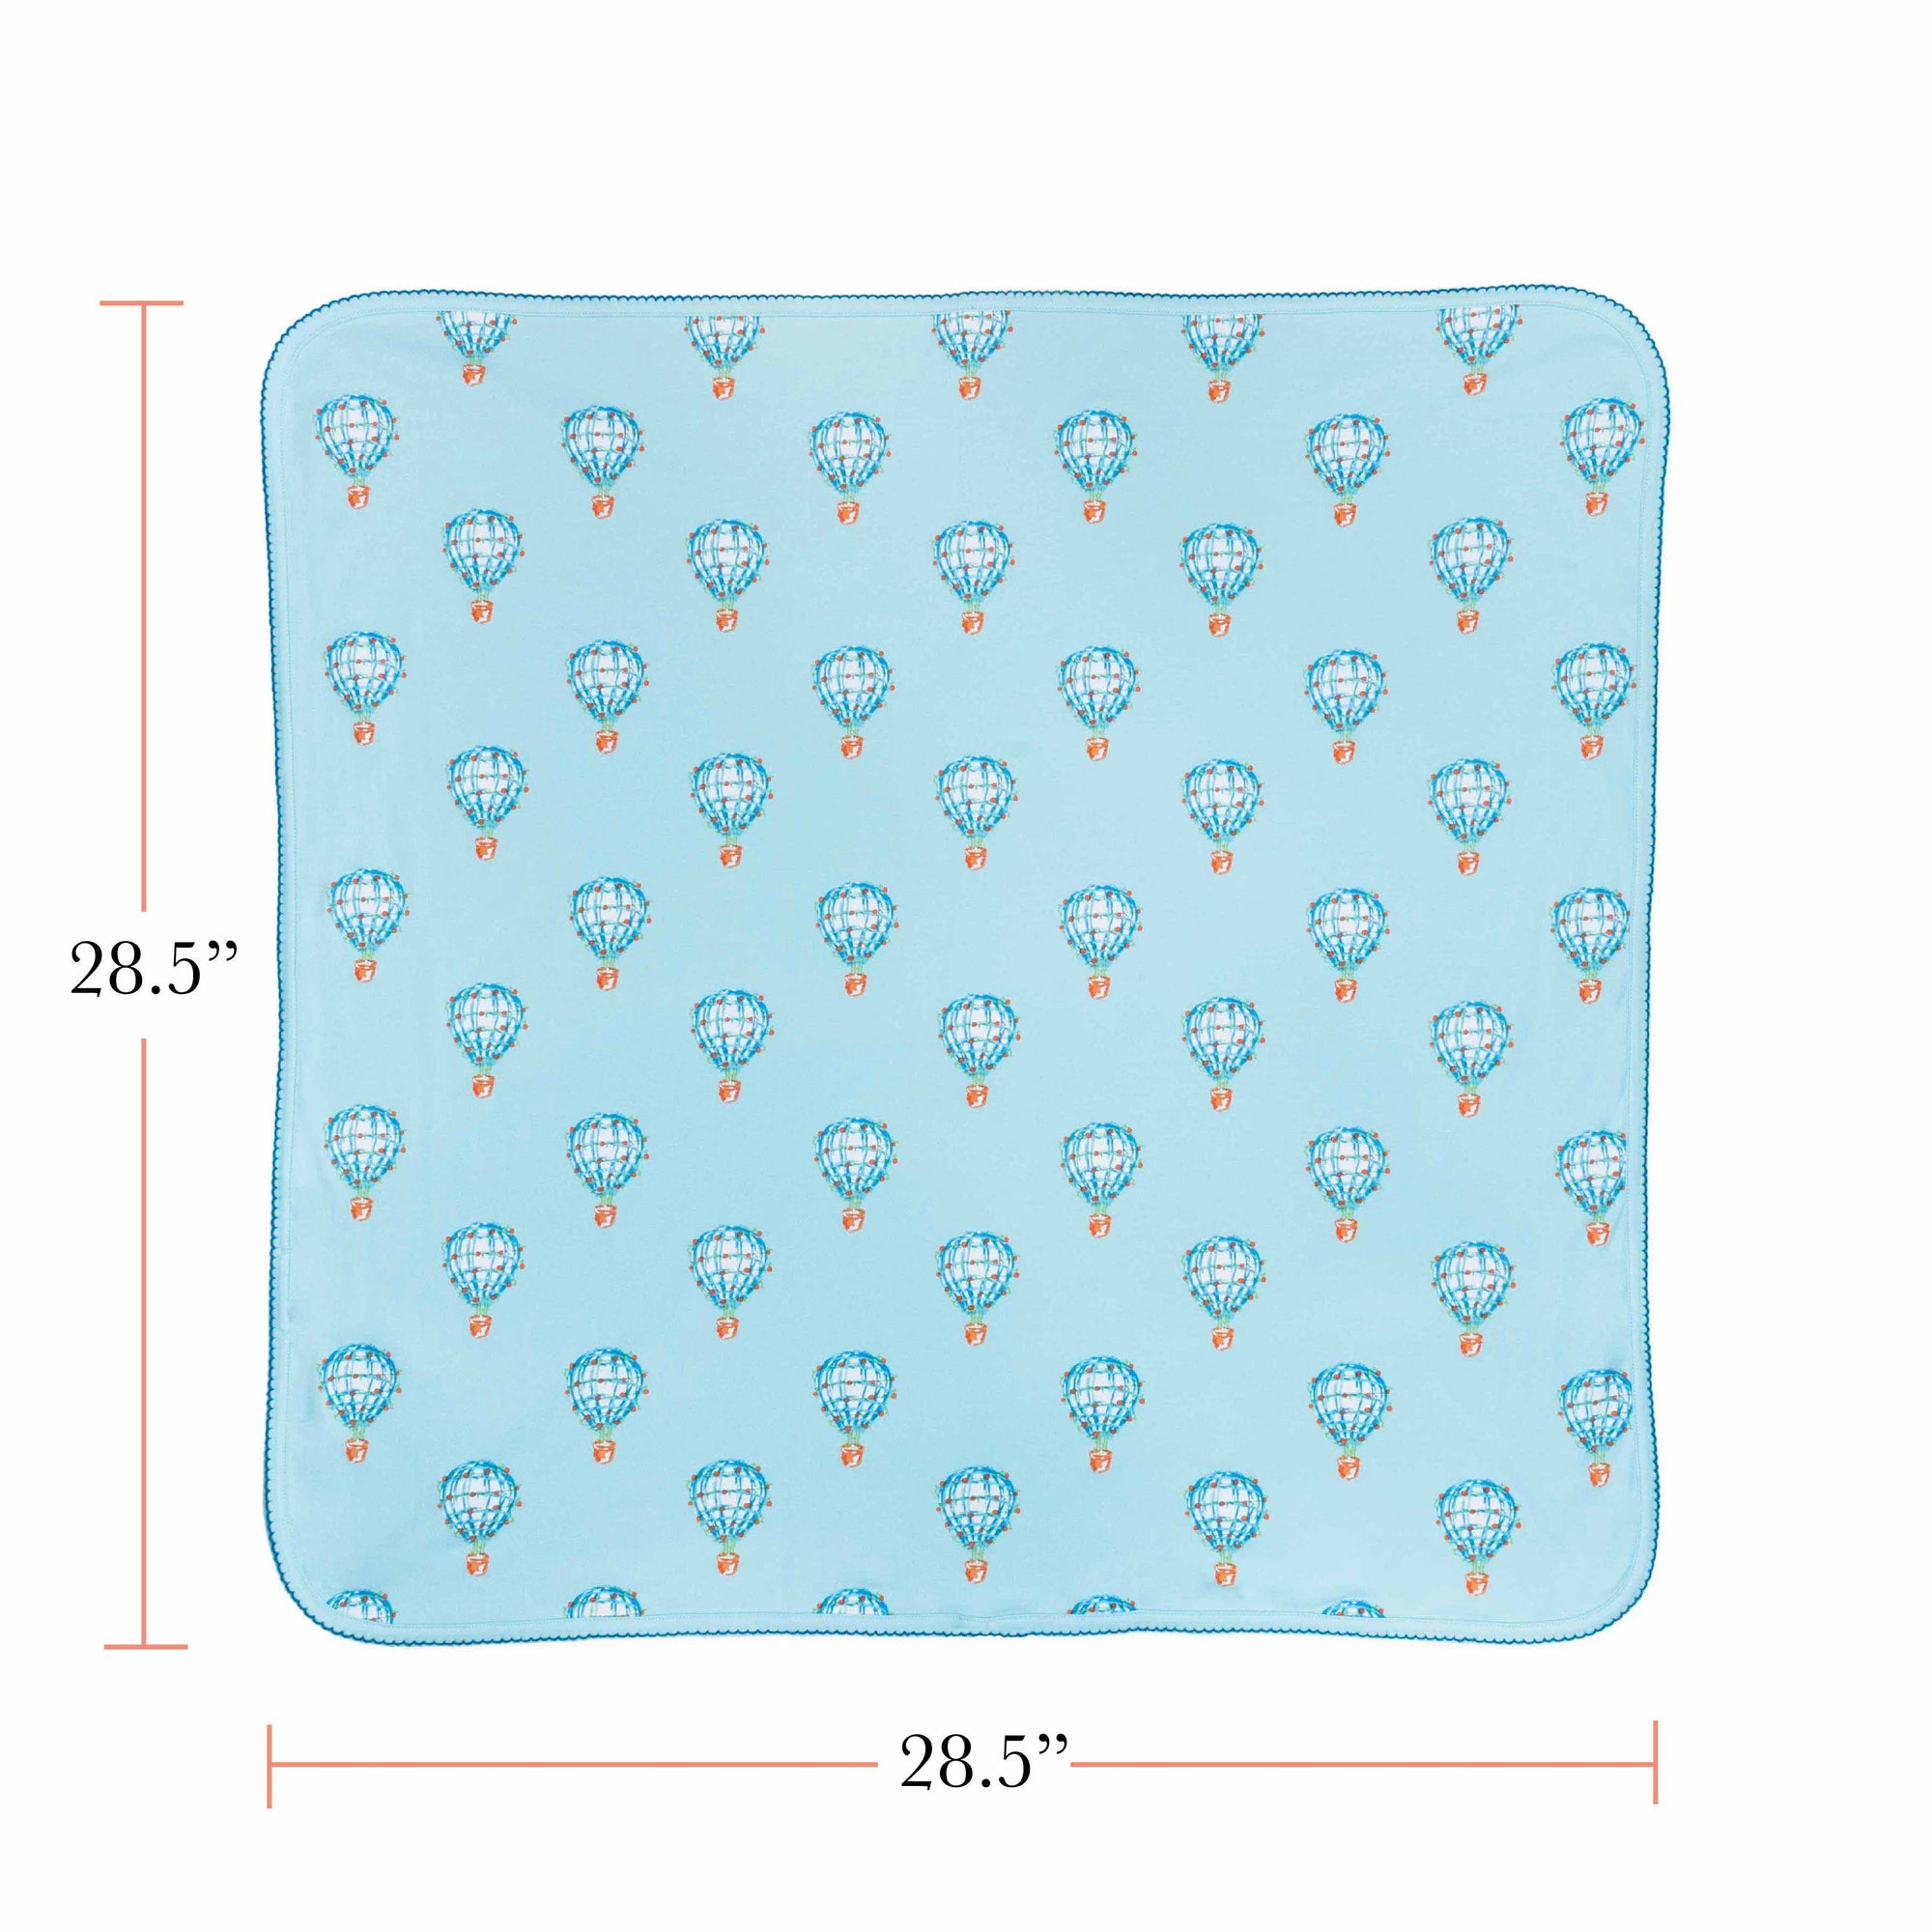 measurements of pima cotton baby blanket with hot air balloonsby heyward house